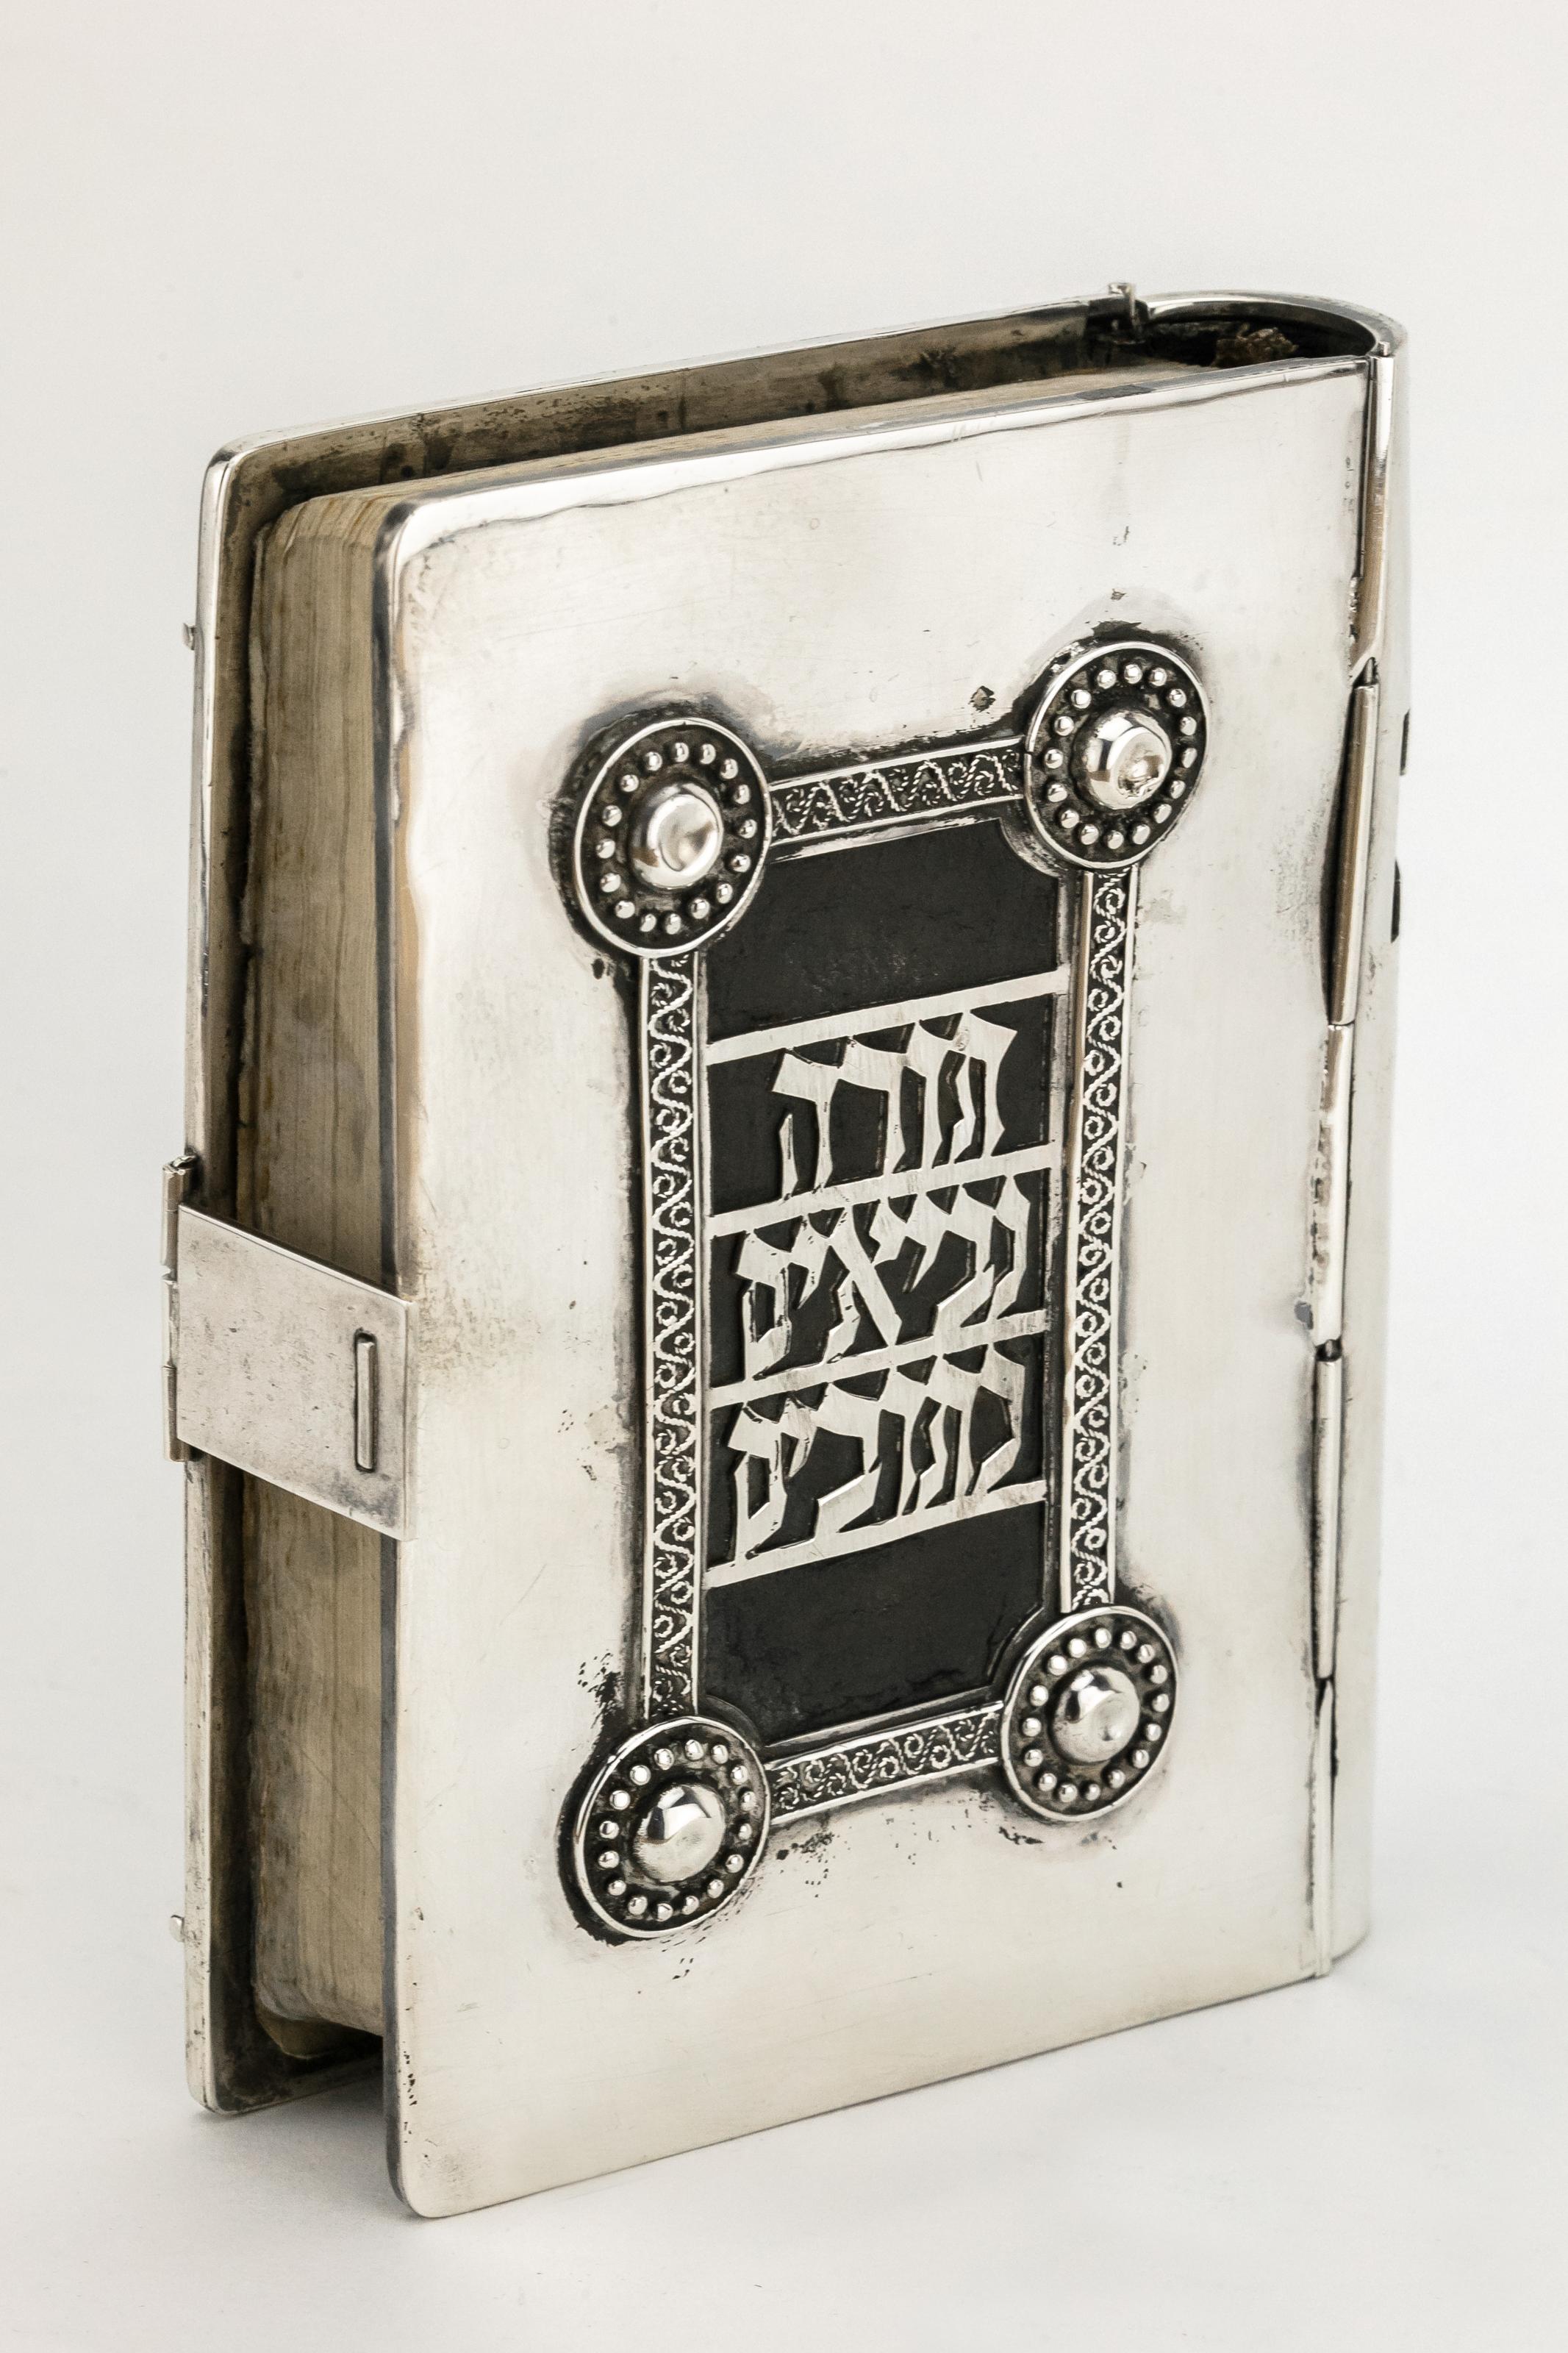 Tanach (Five Books Of Moses) with silver binding, handmade with dedication handwritten and signed by the President of Israel, Shimon Peres.
With the five Megillot, Sinai publishing, Tel Aviv. Given in a handmade, cut silver binding, delicately done